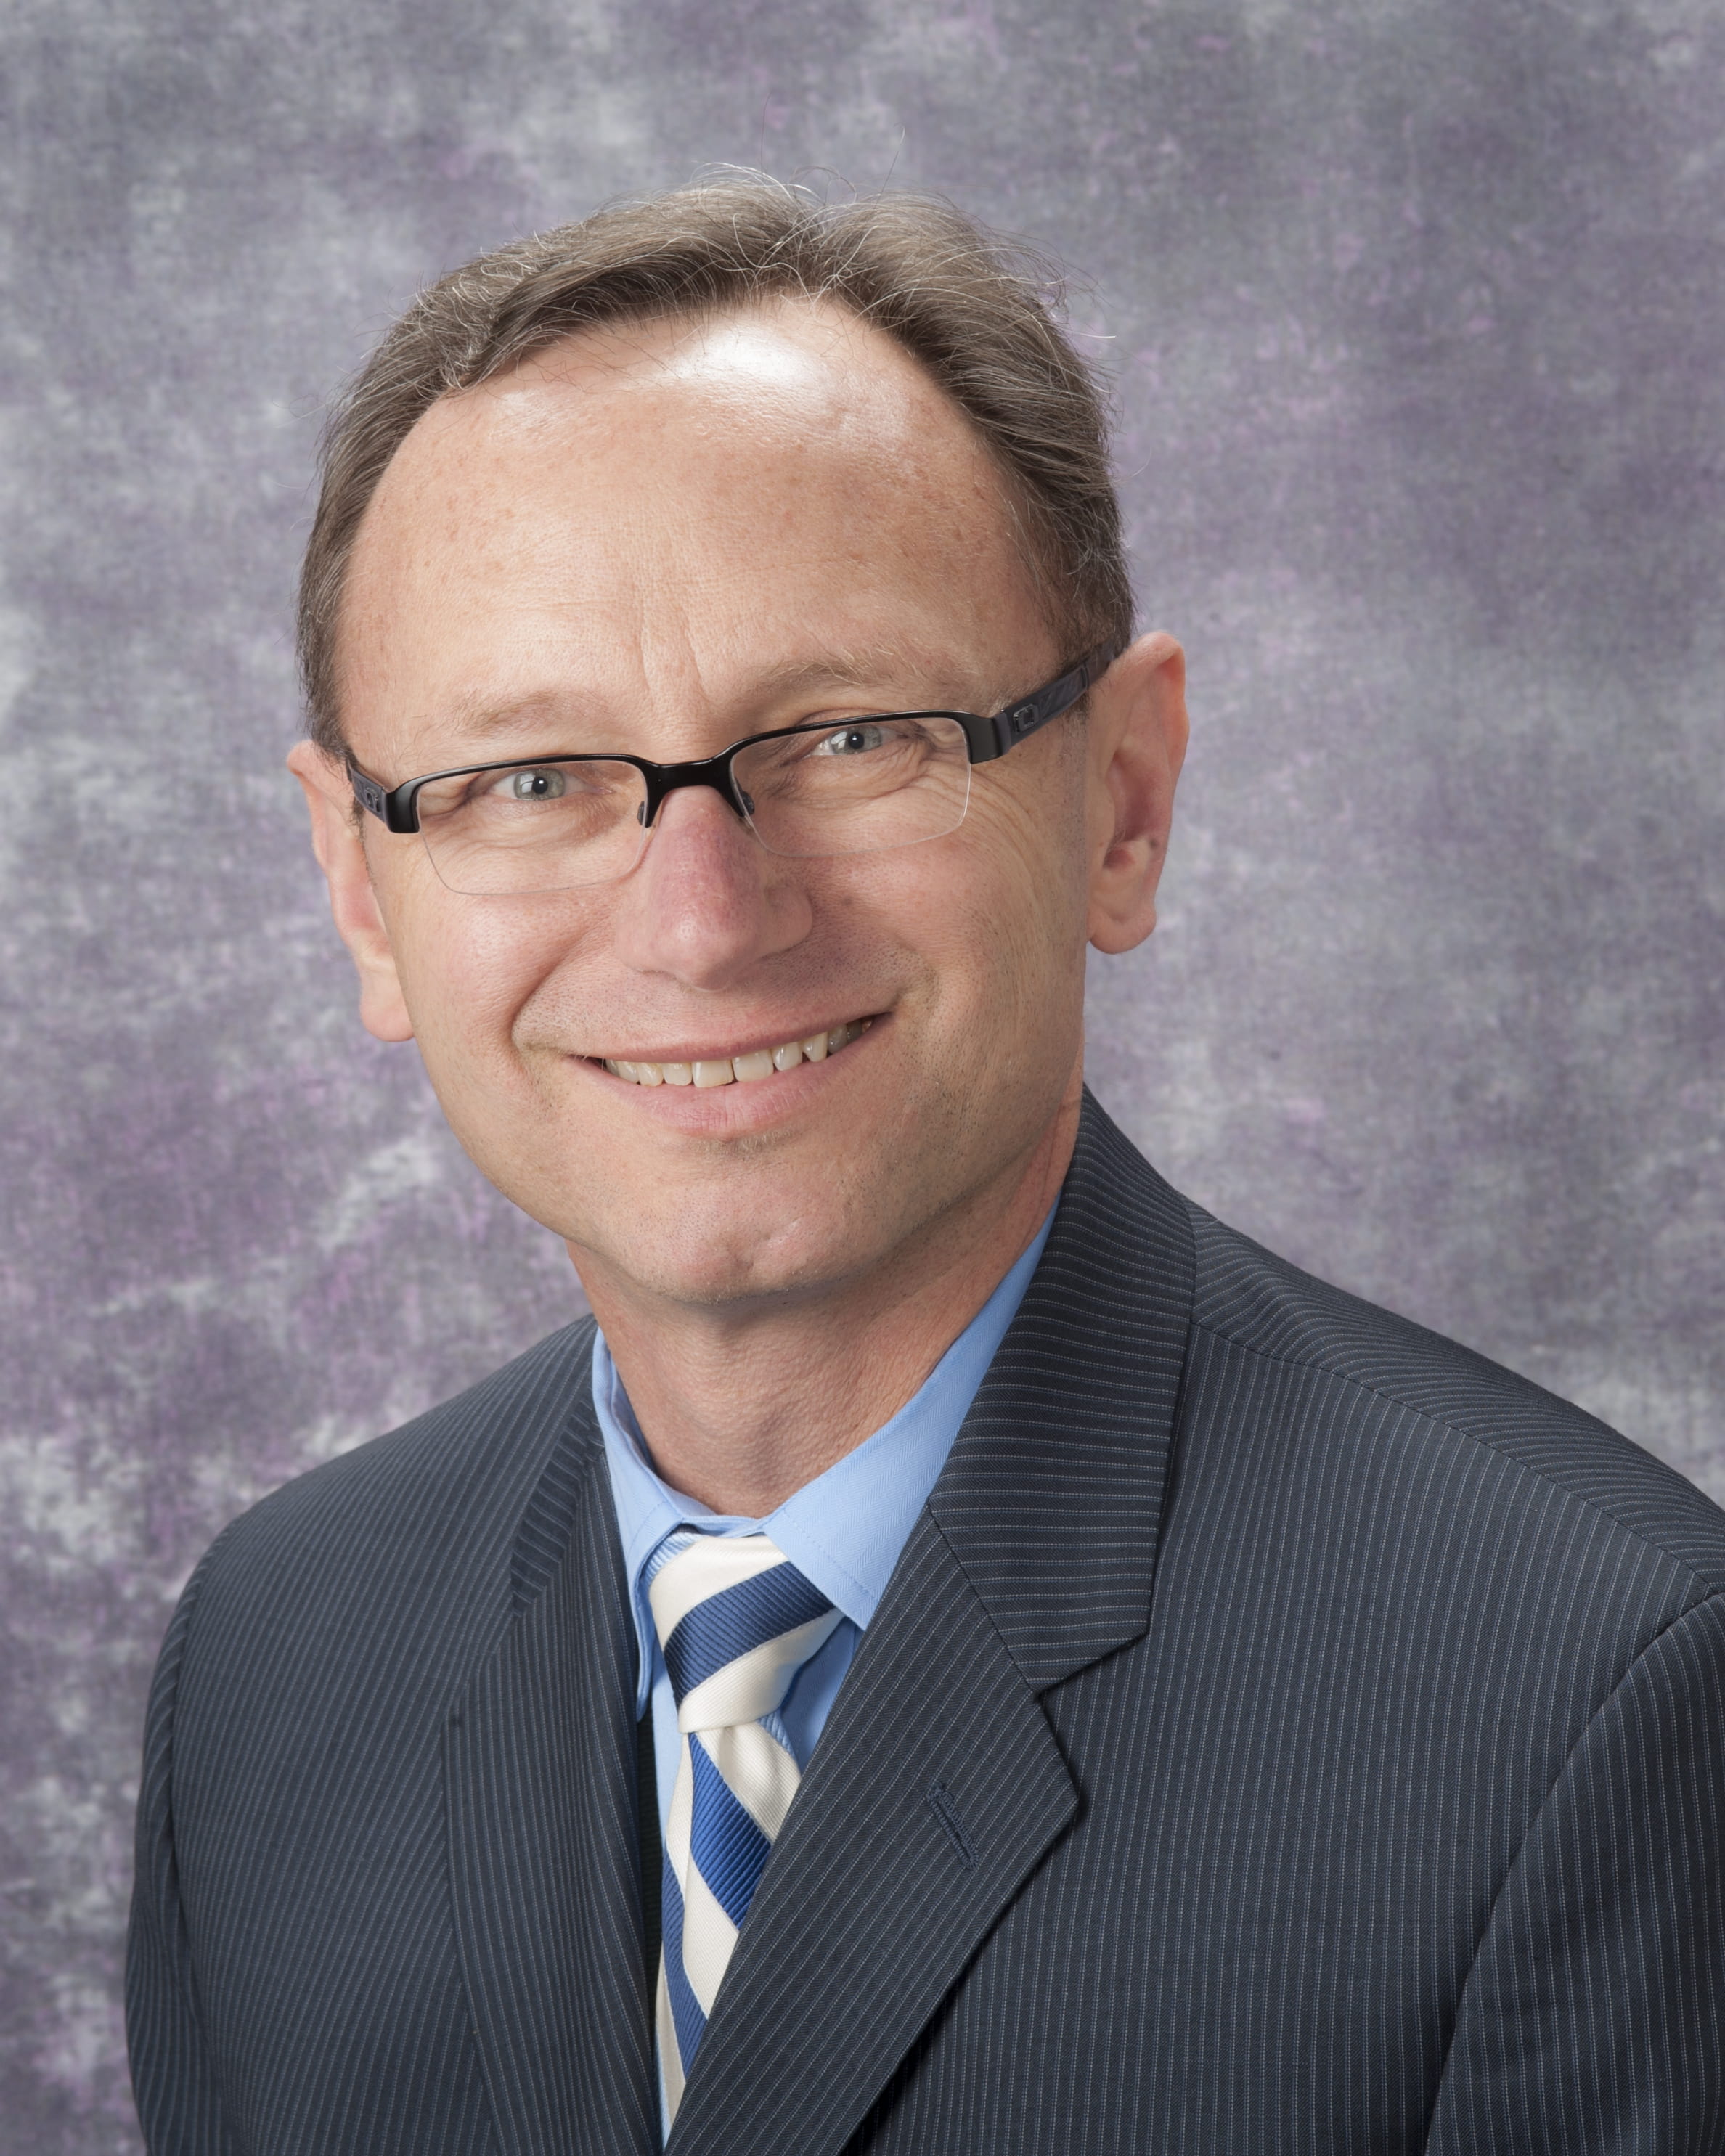 Robert Edwards, MD, Chair of the Department of Obstetrics, Gynecology & Reproductive Sciences and Co-Director of Gynecologic Oncology Research at Magee-Womens Hospital of UPMC